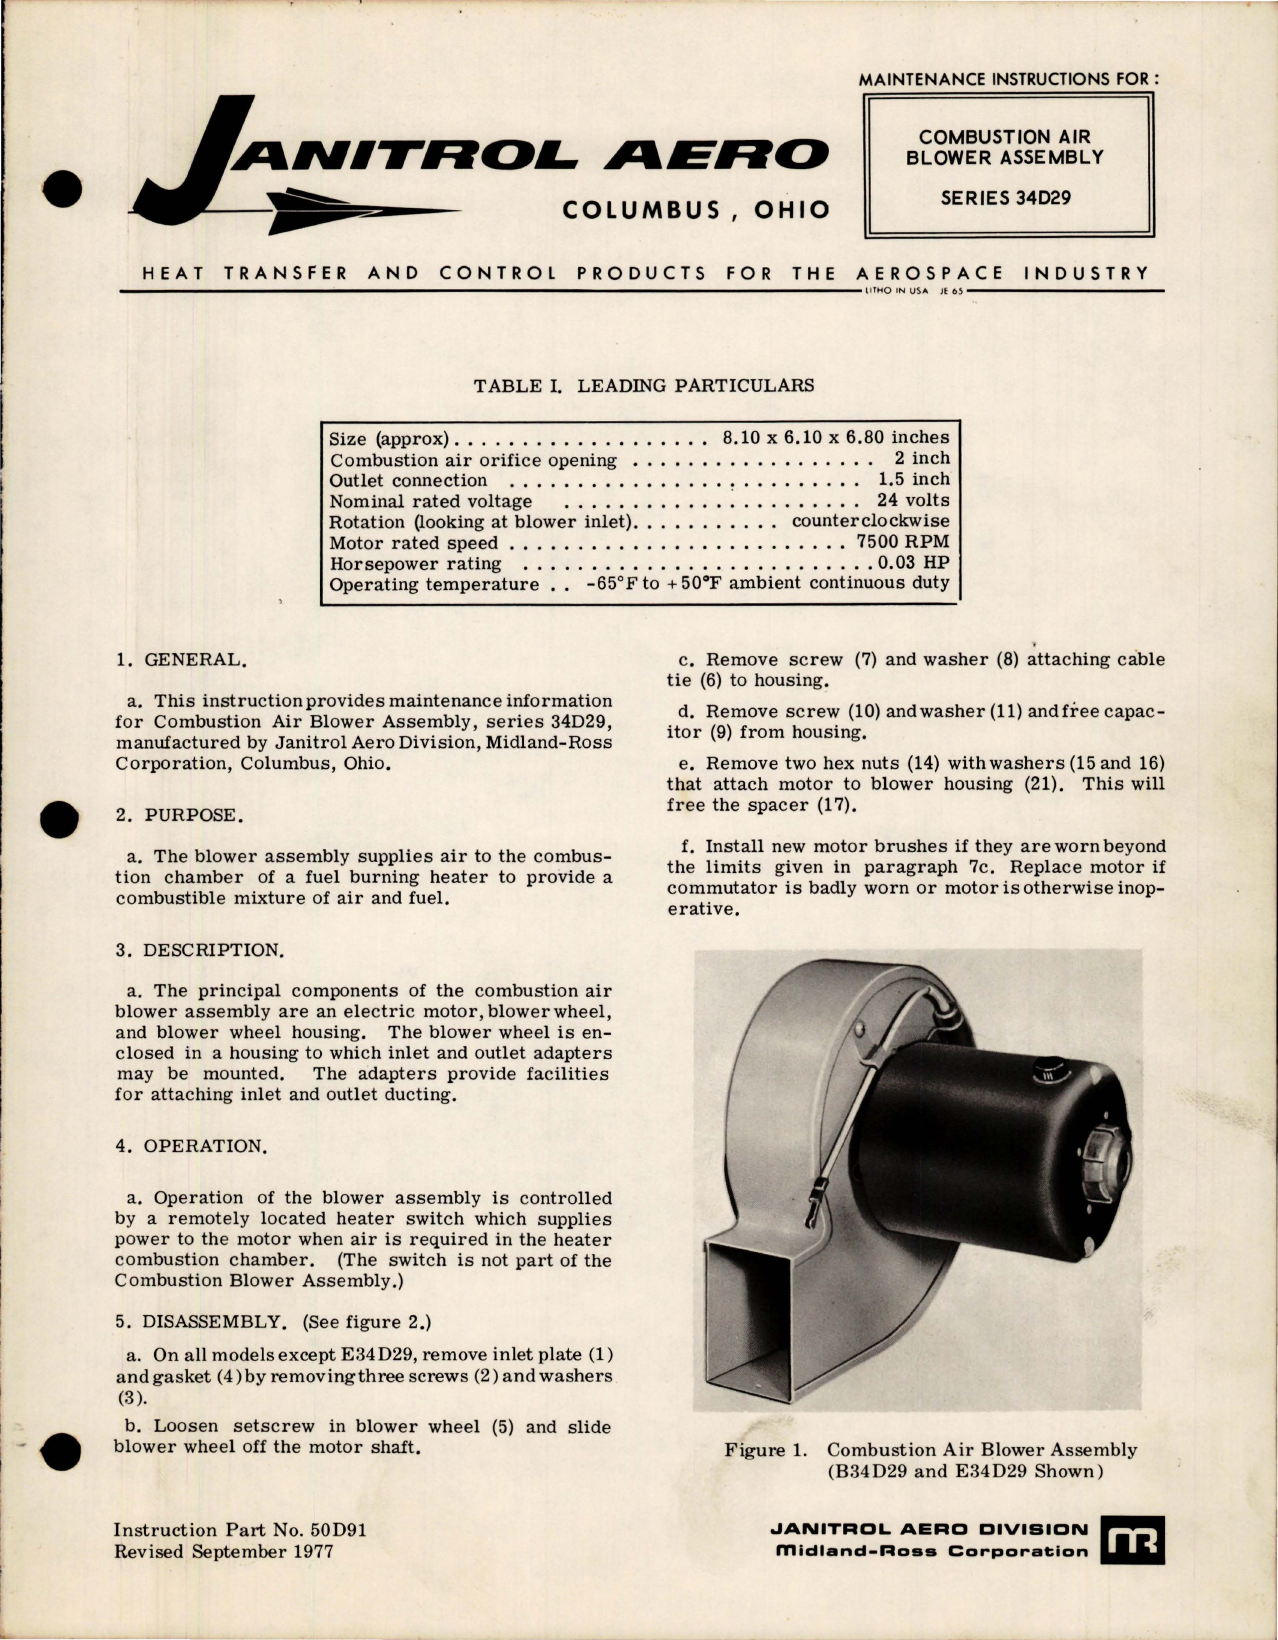 Sample page 1 from AirCorps Library document: Maintenance Instructions for Combustion Air Blower Assembly - Series 34D29